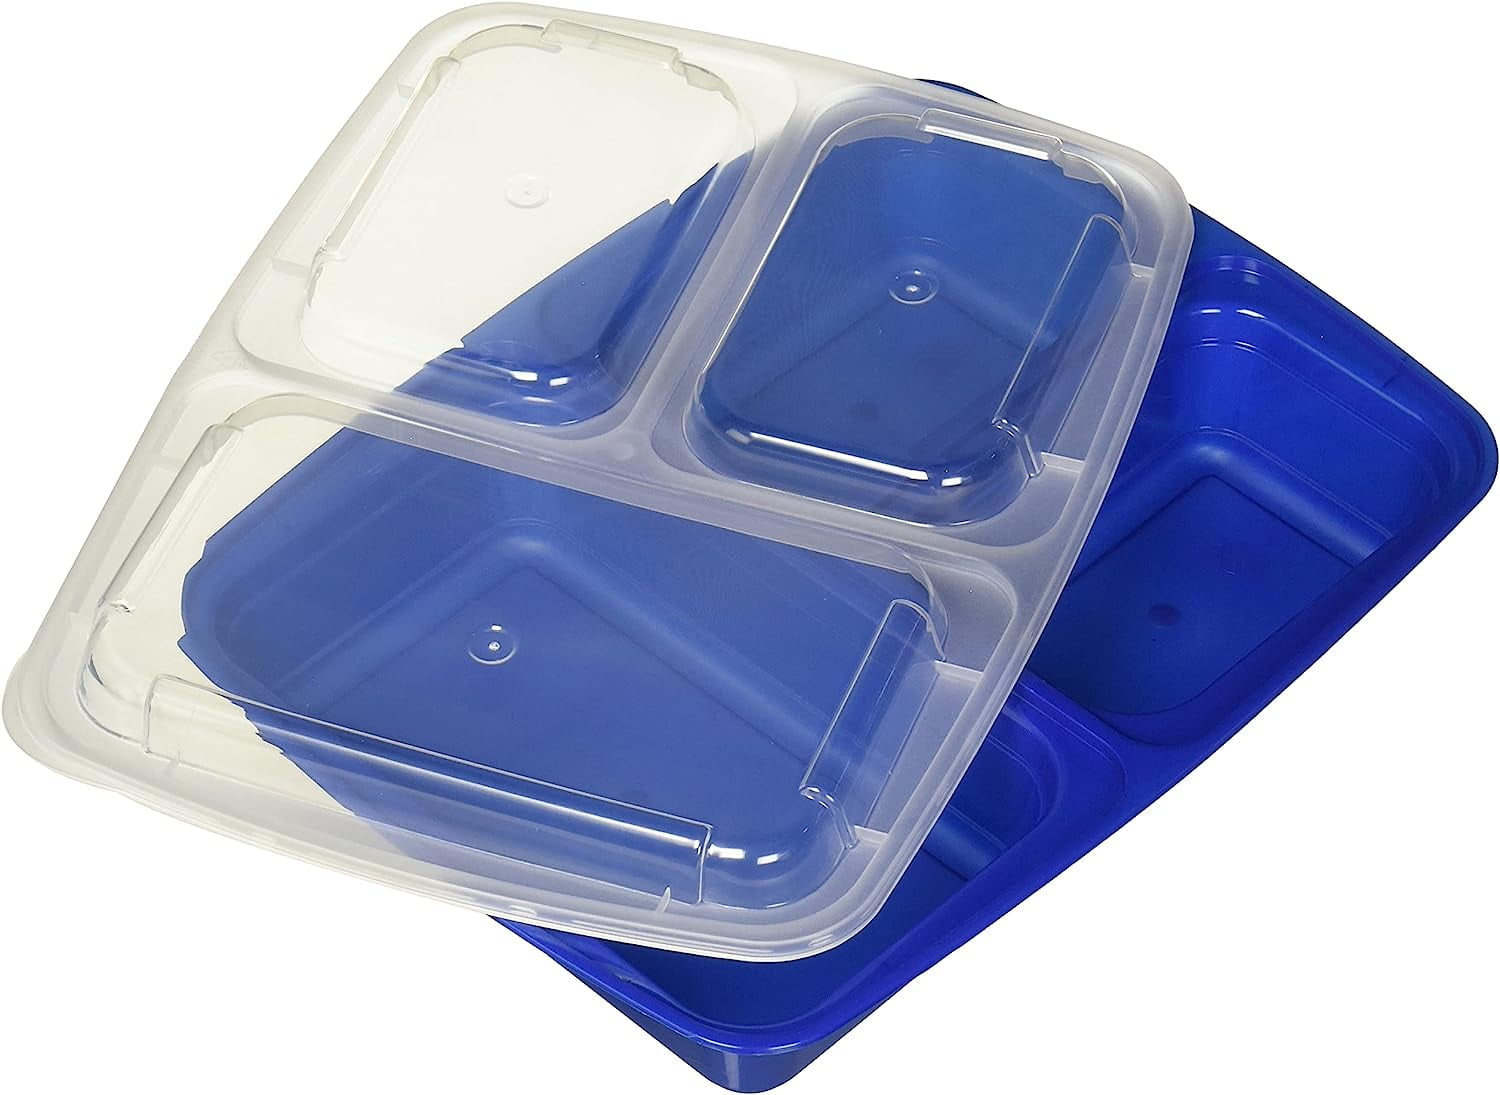 Blue Stylish 10-Pack Navy Blue 3-Compartment Meal-Prep Containers with Lids  - Microwaveable, BPA-Free, Freezer & Dishwasher Safe - AliExpress